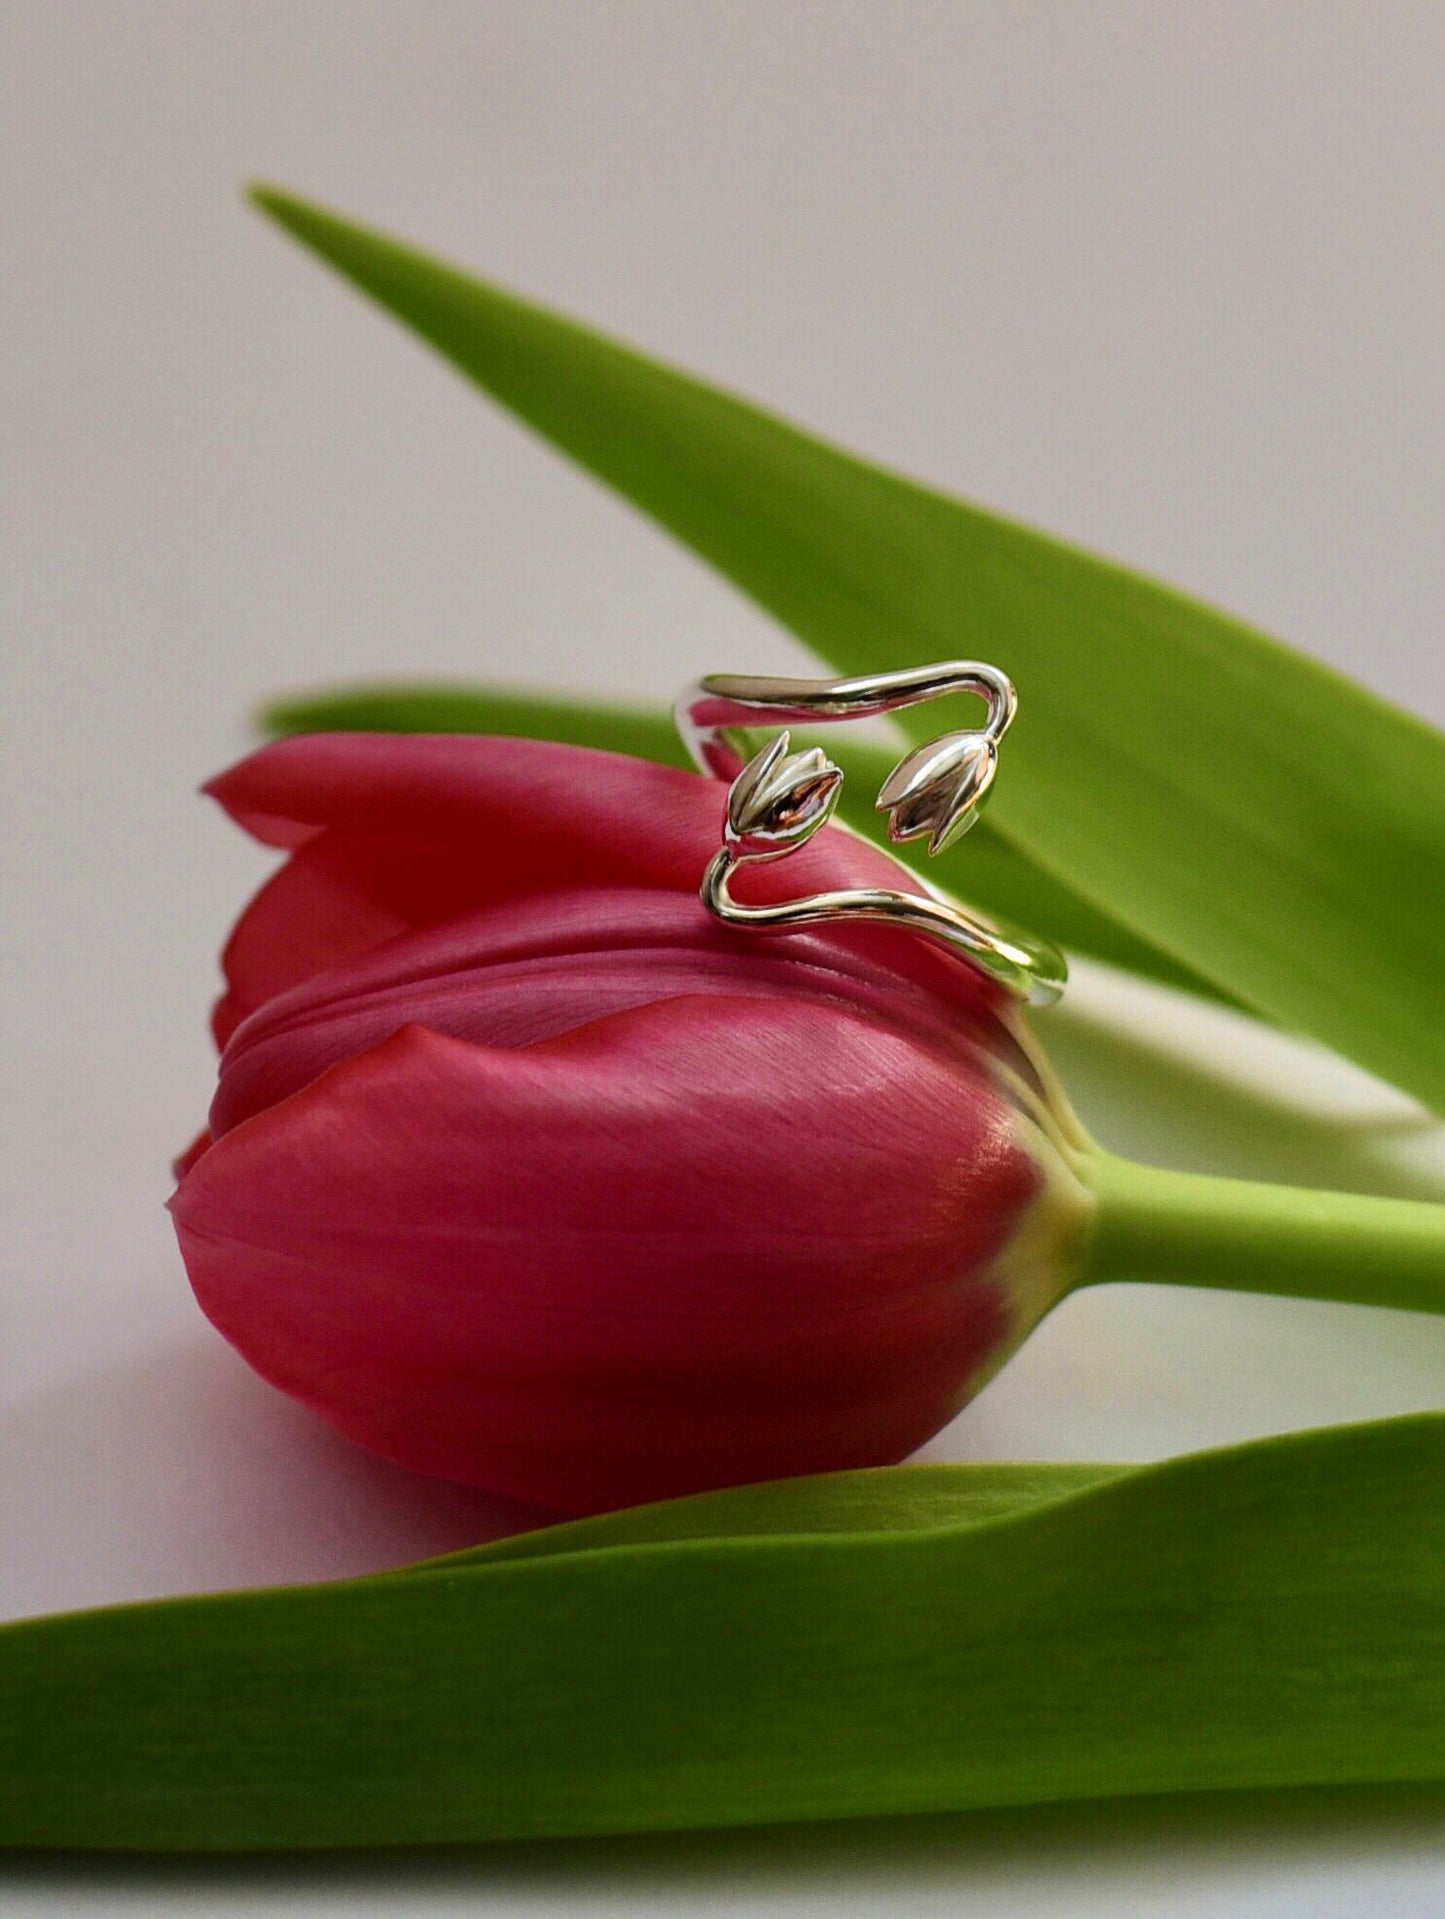 Open Tulip ring - One of a Kind